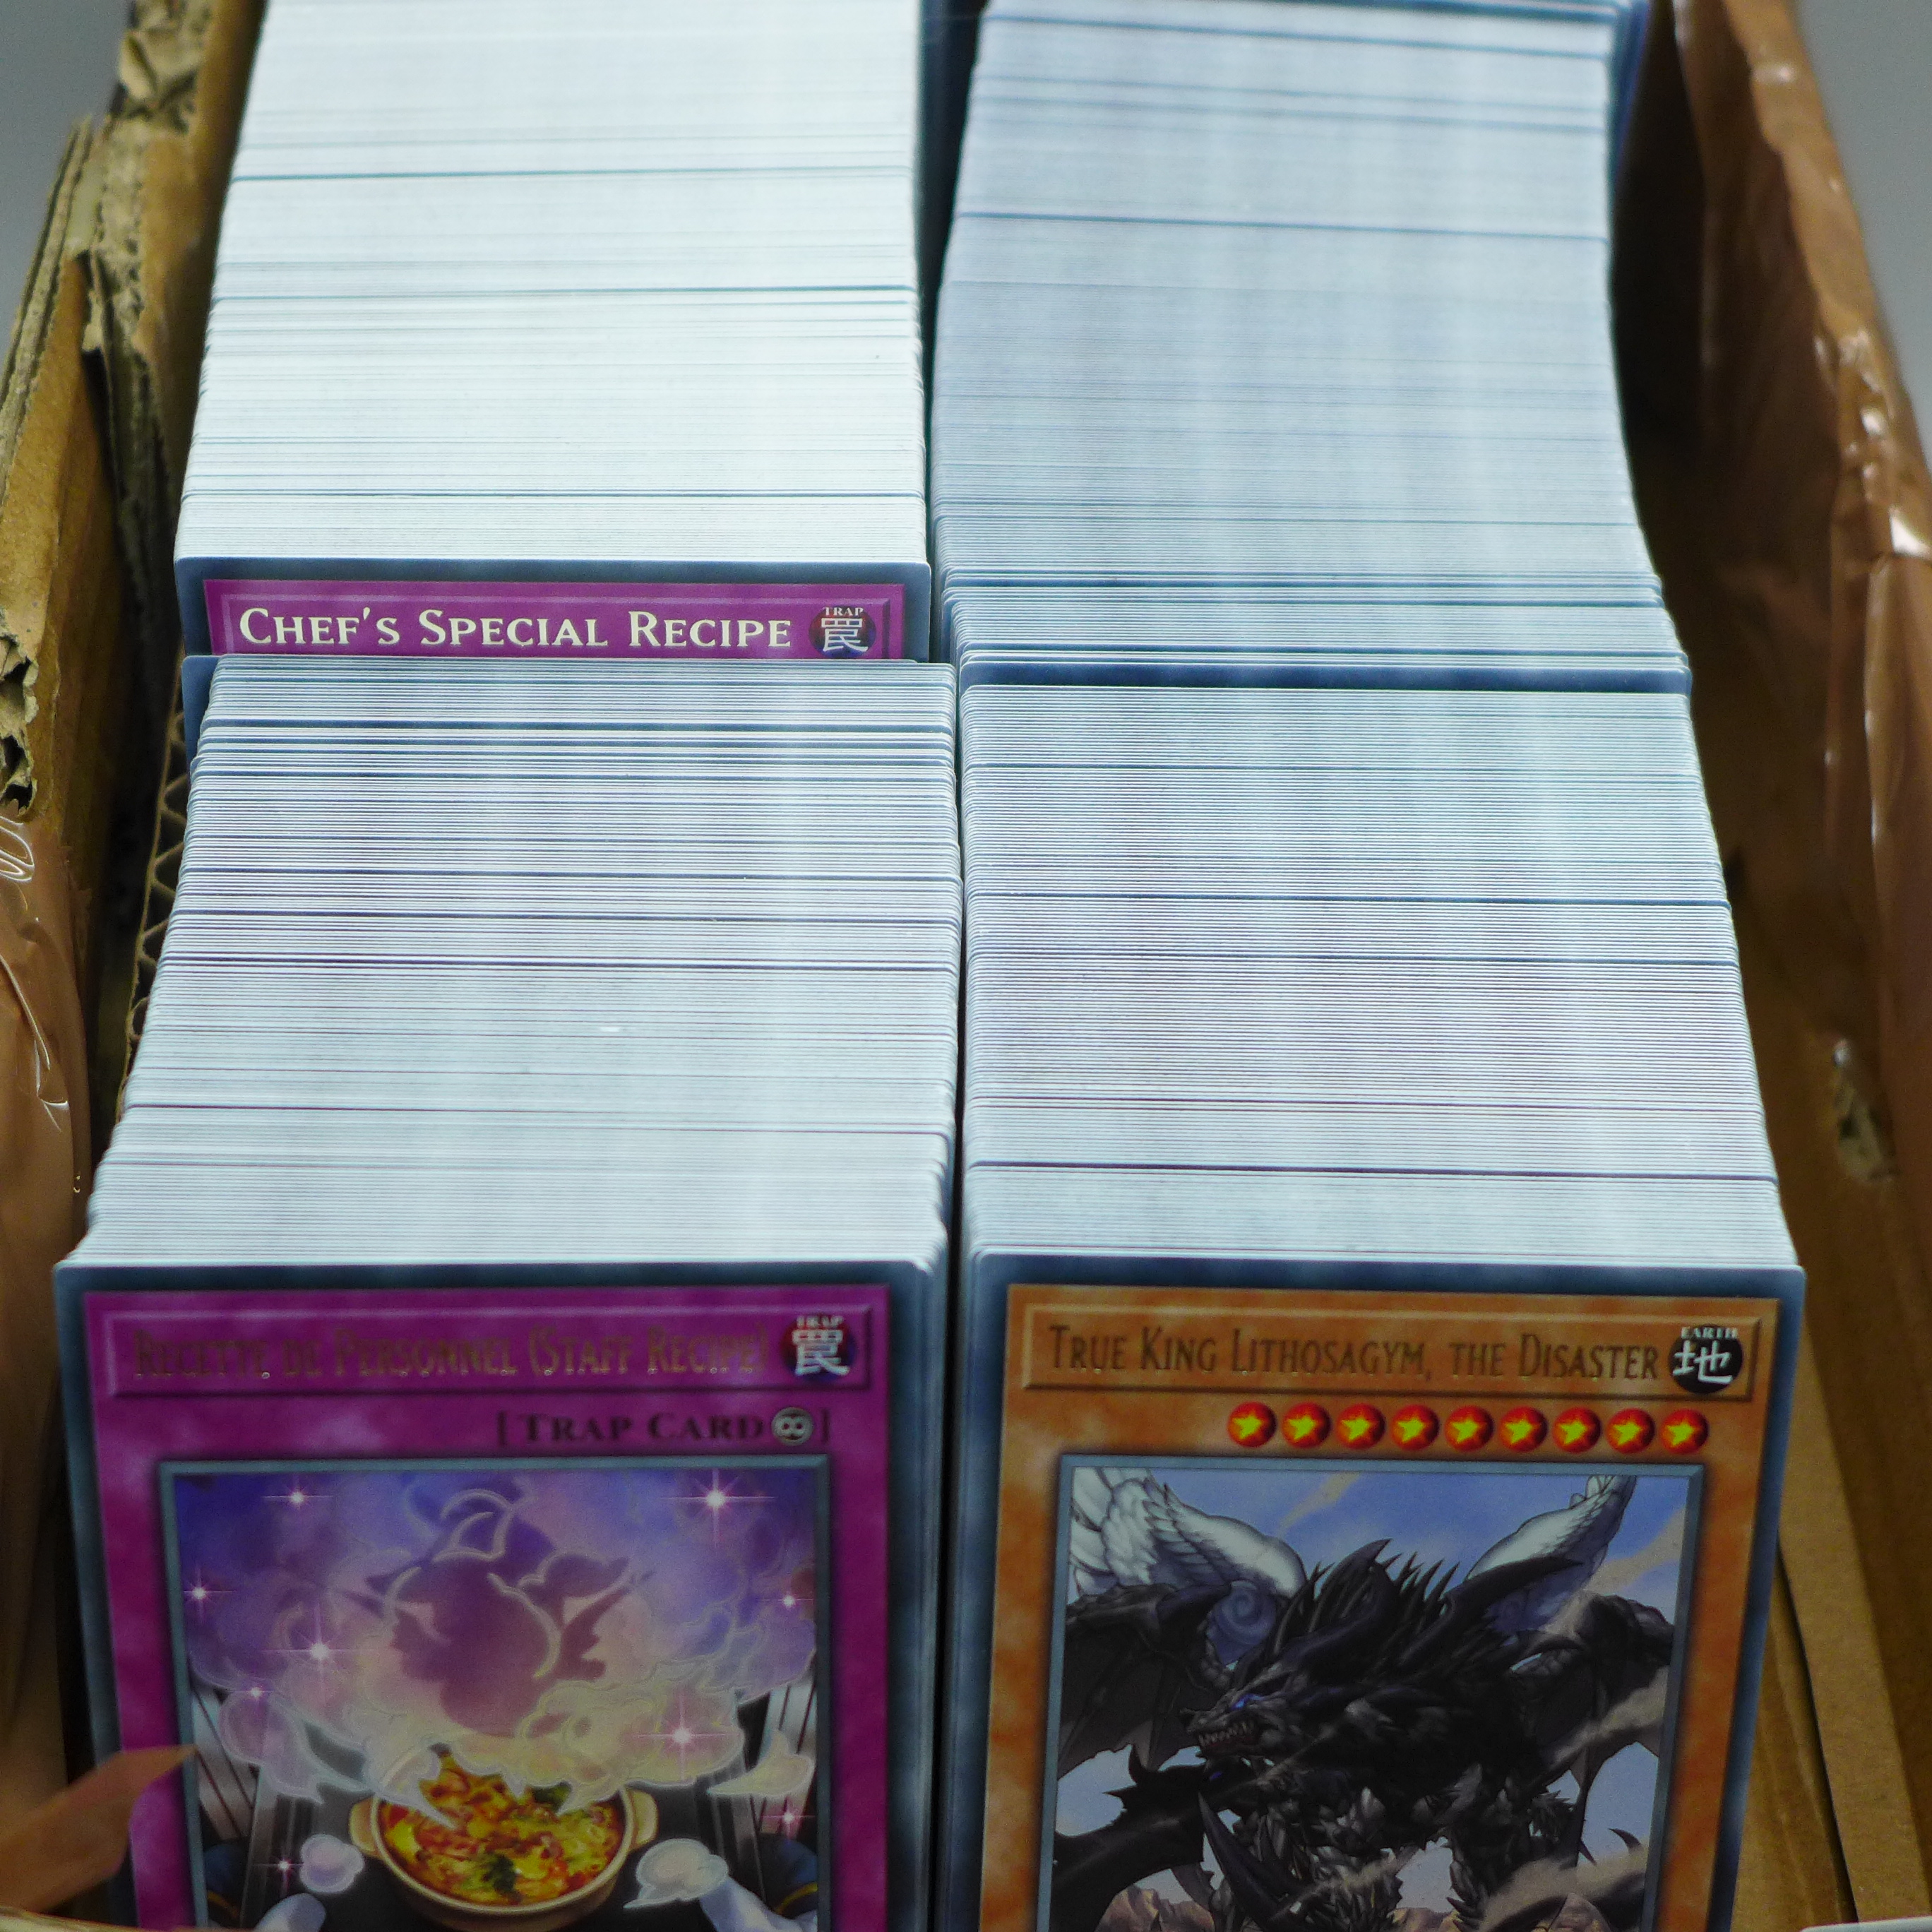 1000 First edition Yu-Gi-Oh! cards including rares - Image 2 of 4